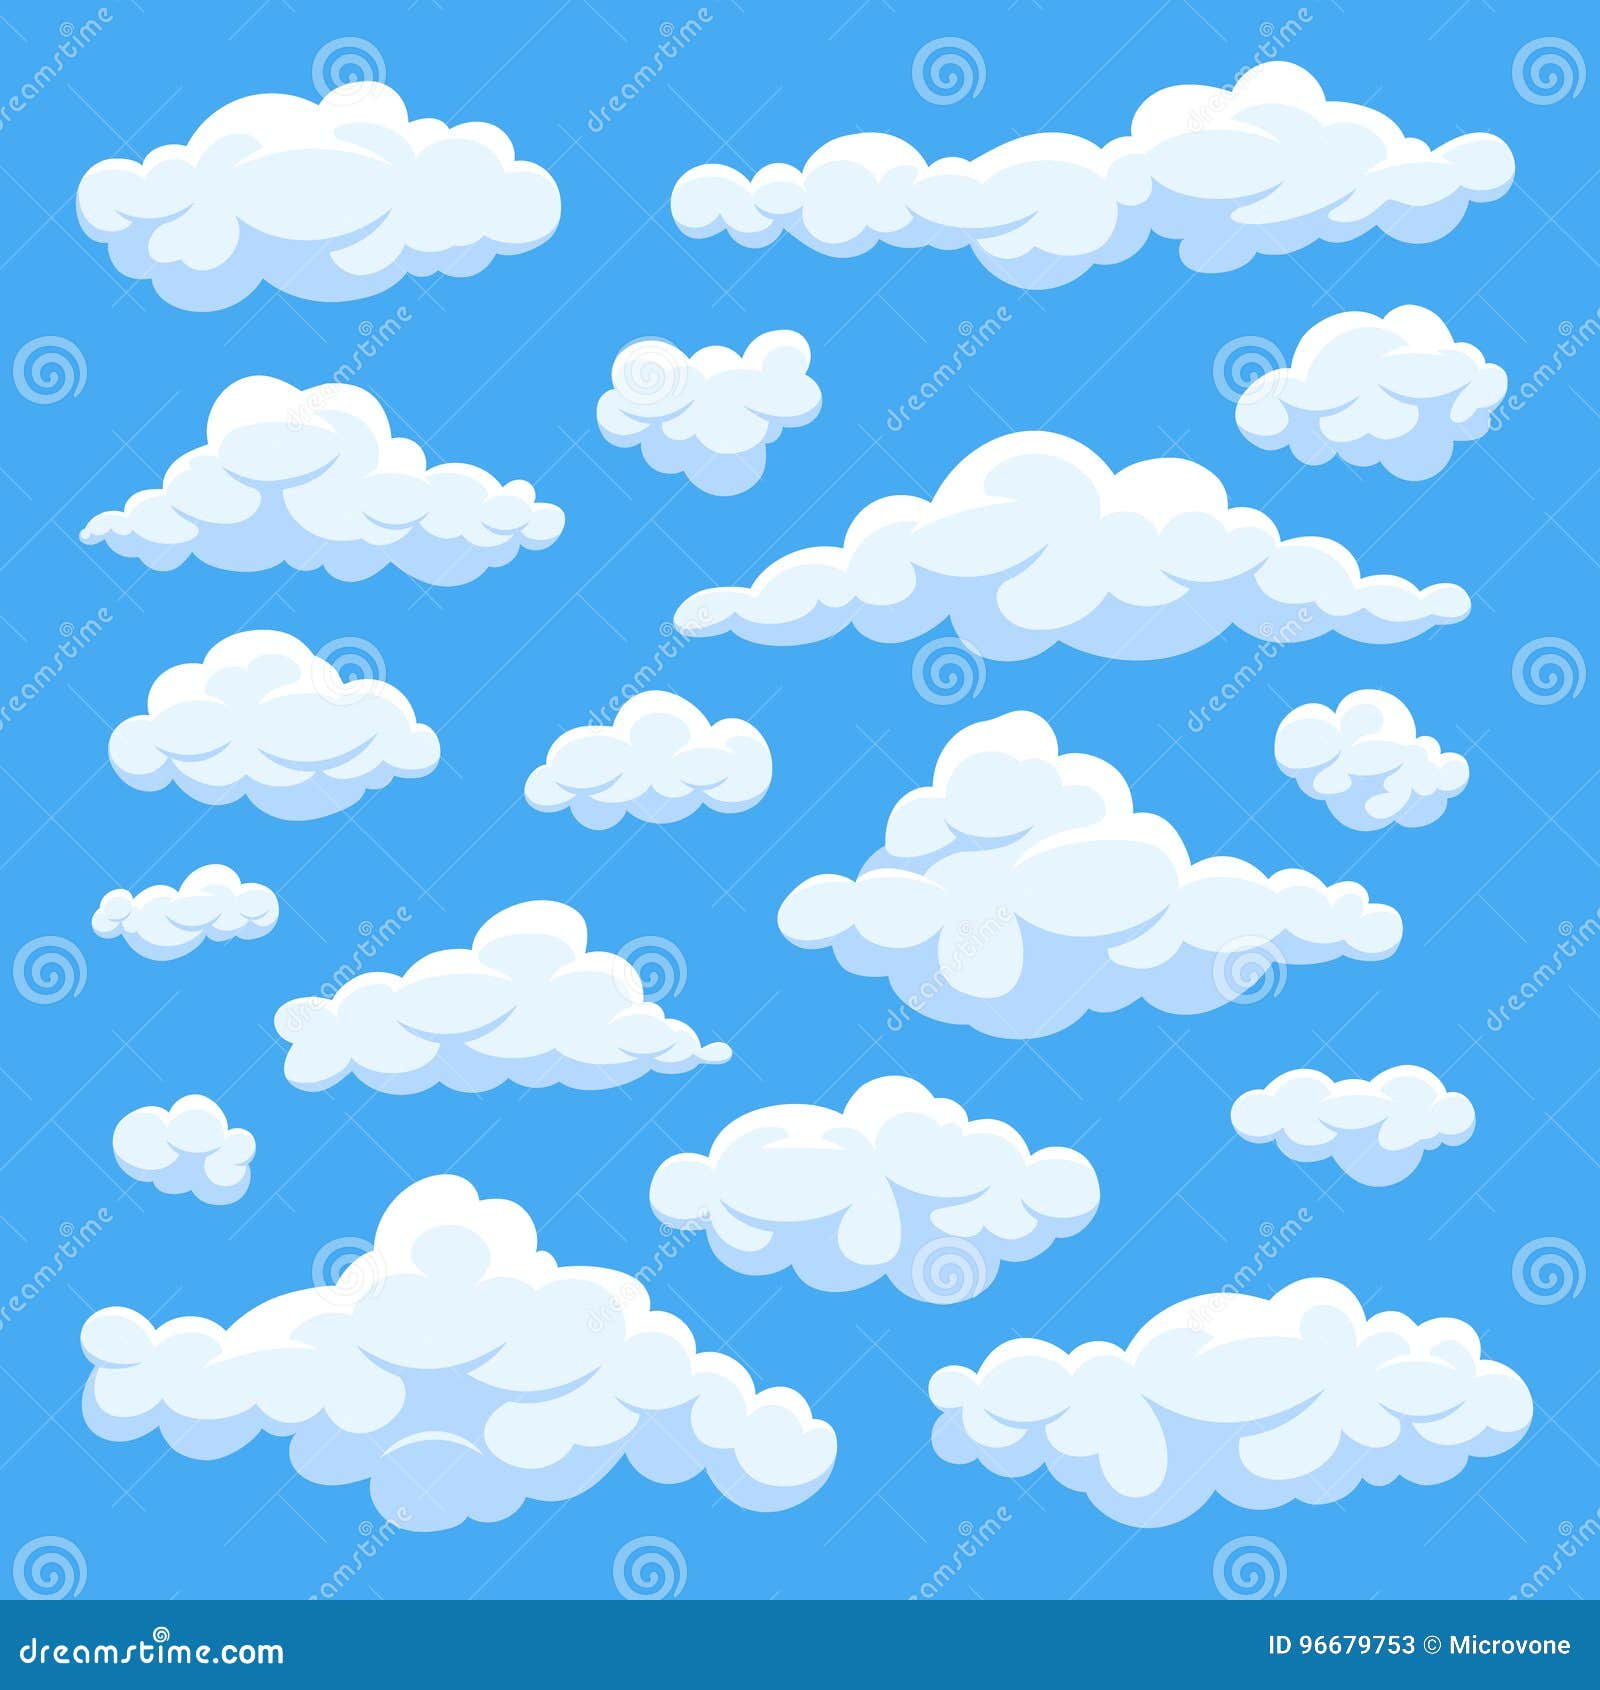 https://thumbs.dreamstime.com/z/fluffy-white-cartoon-clouds-blue-sky-vector-set-cloudy-day-heaven-illustration-96679753.jpg